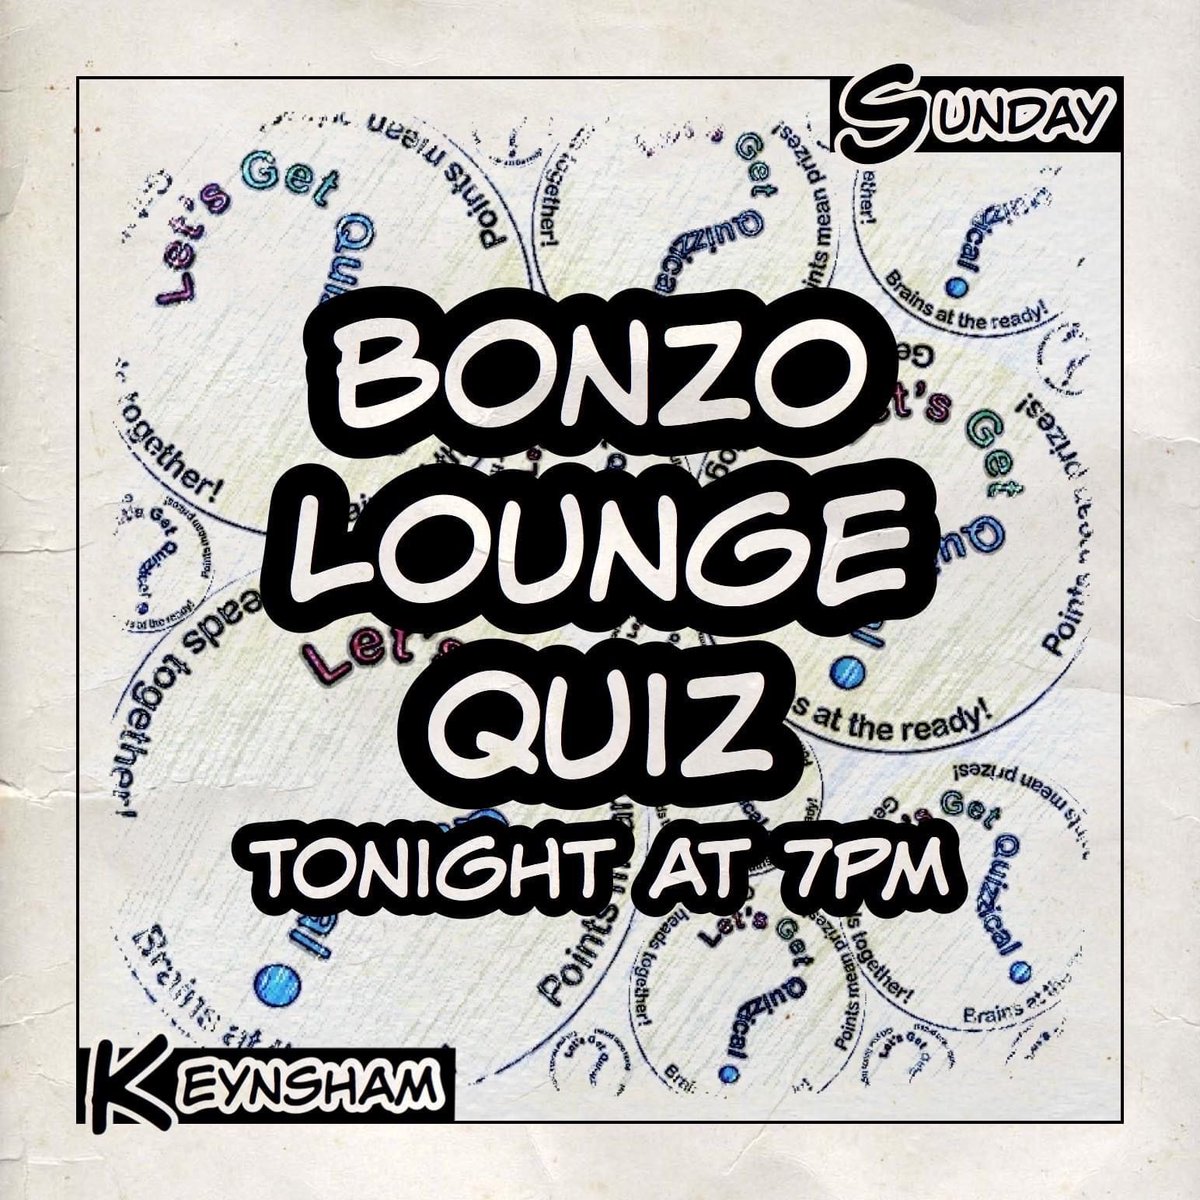 It’s #QuizNight at #TheBonzoLounge in #Keynsham. 7pm start for our #GeneralKnowledge #Quiz with cash and vouchers to be won